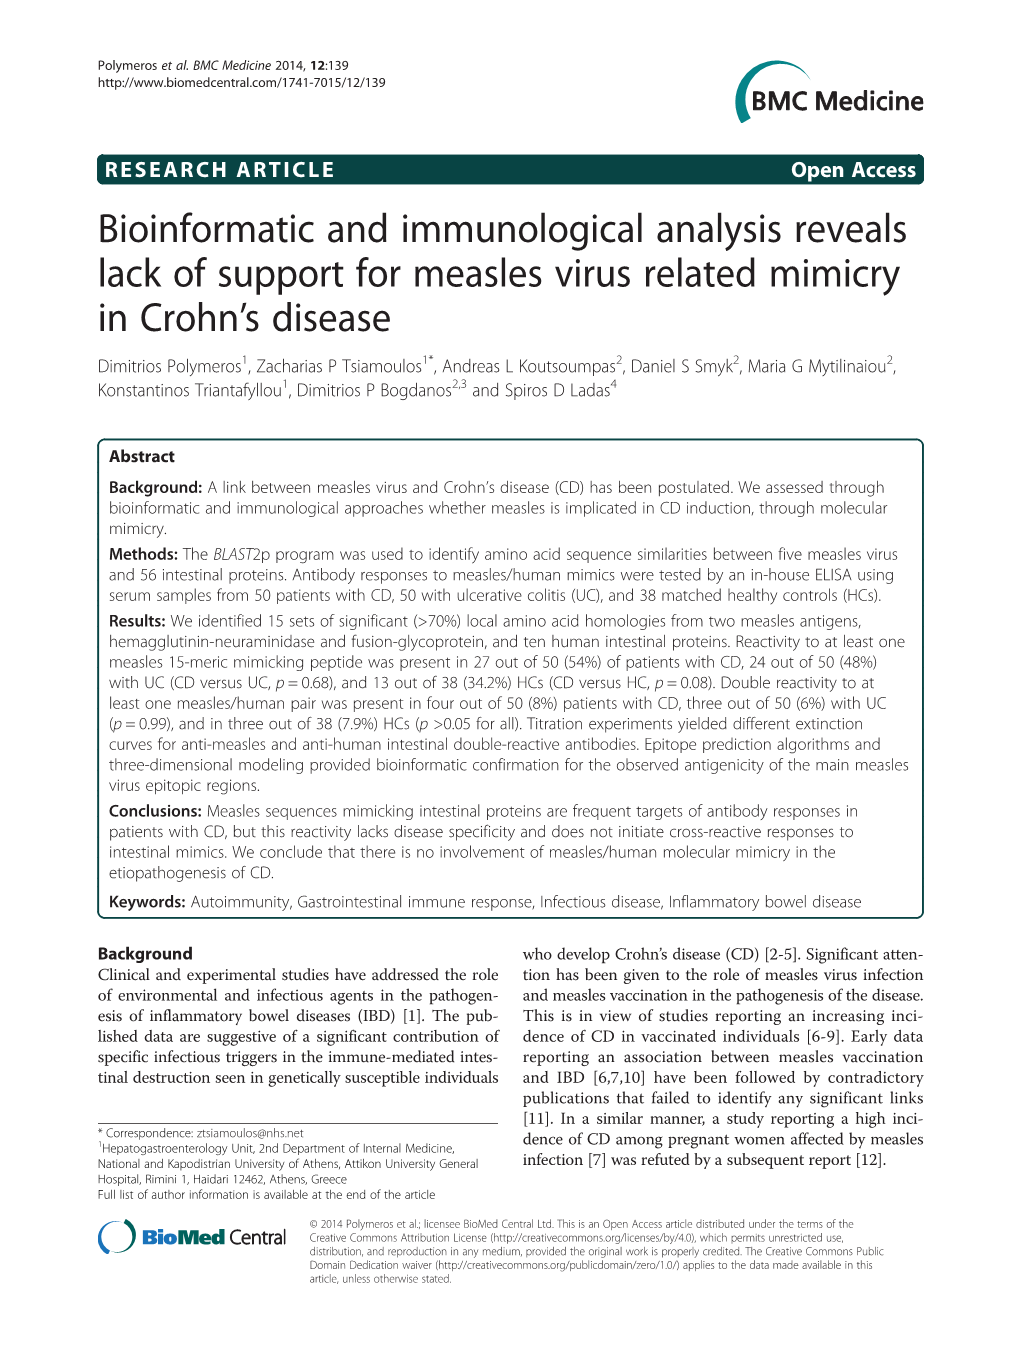 Bioinformatic and Immunological Analysis Reveals Lack of Support For